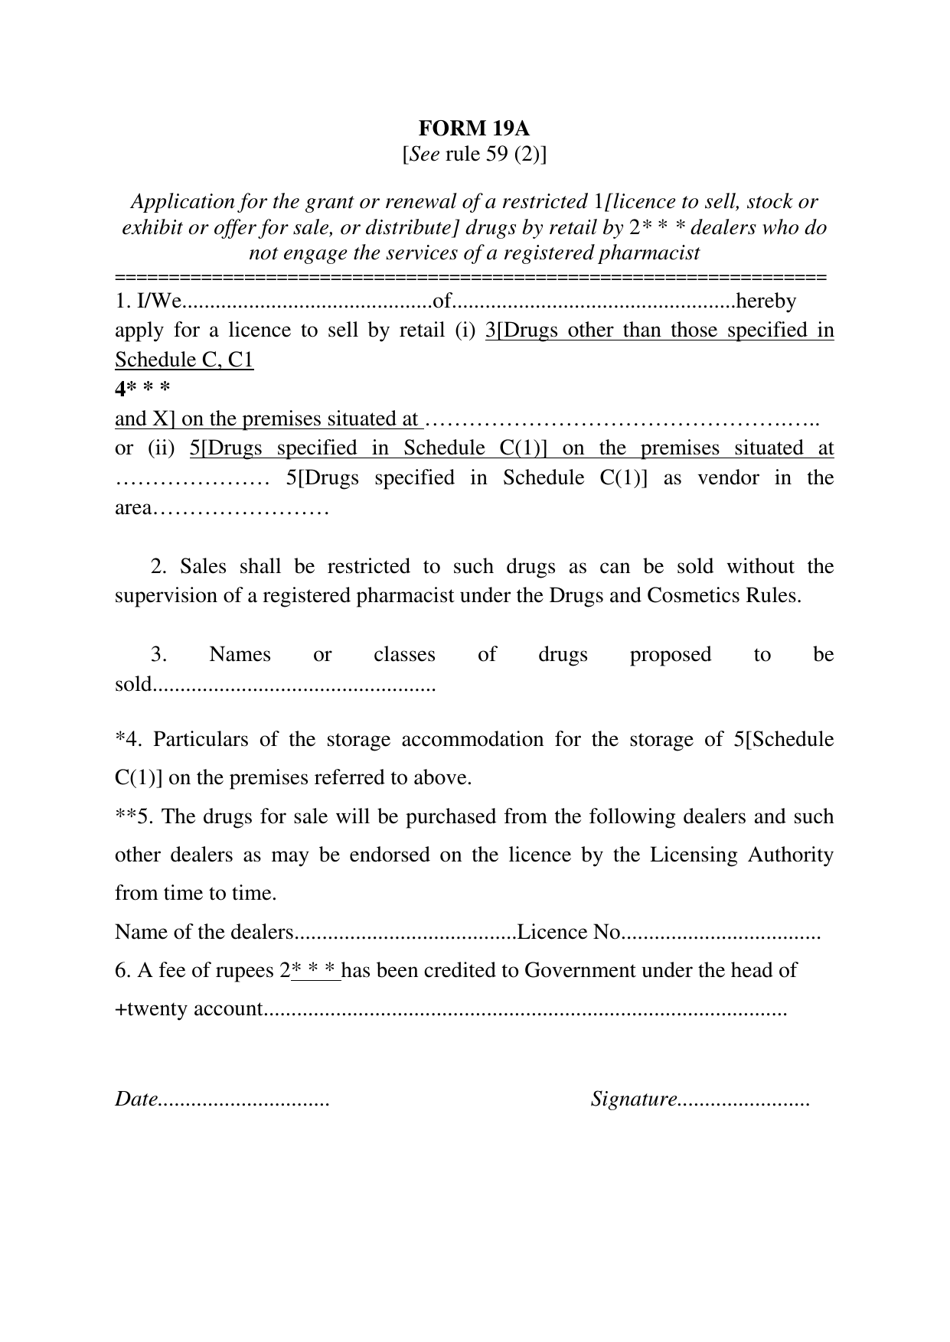 Form 19A Application for the Grant or Renewal of a Restricted Licence to Sell, Stock or Exhibit or Offer for Sale, or Distribute Drugs by Retail by Dealers Who Do Not Engage the Services of a Registered Pharmacist - Daman and Diu, India, Page 1